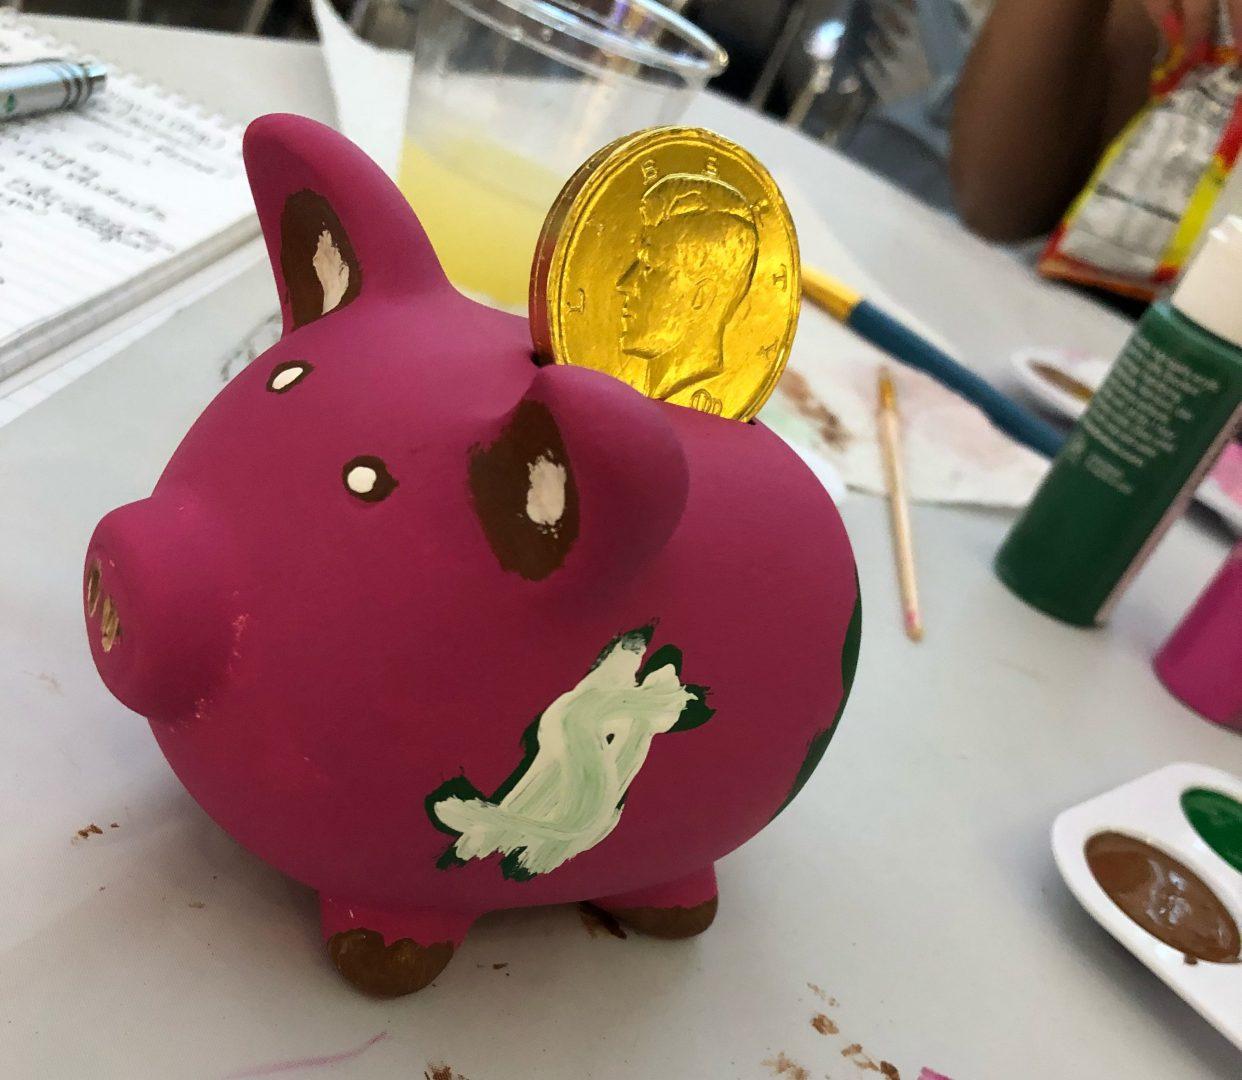 Students learn about finances by painting piggy banks